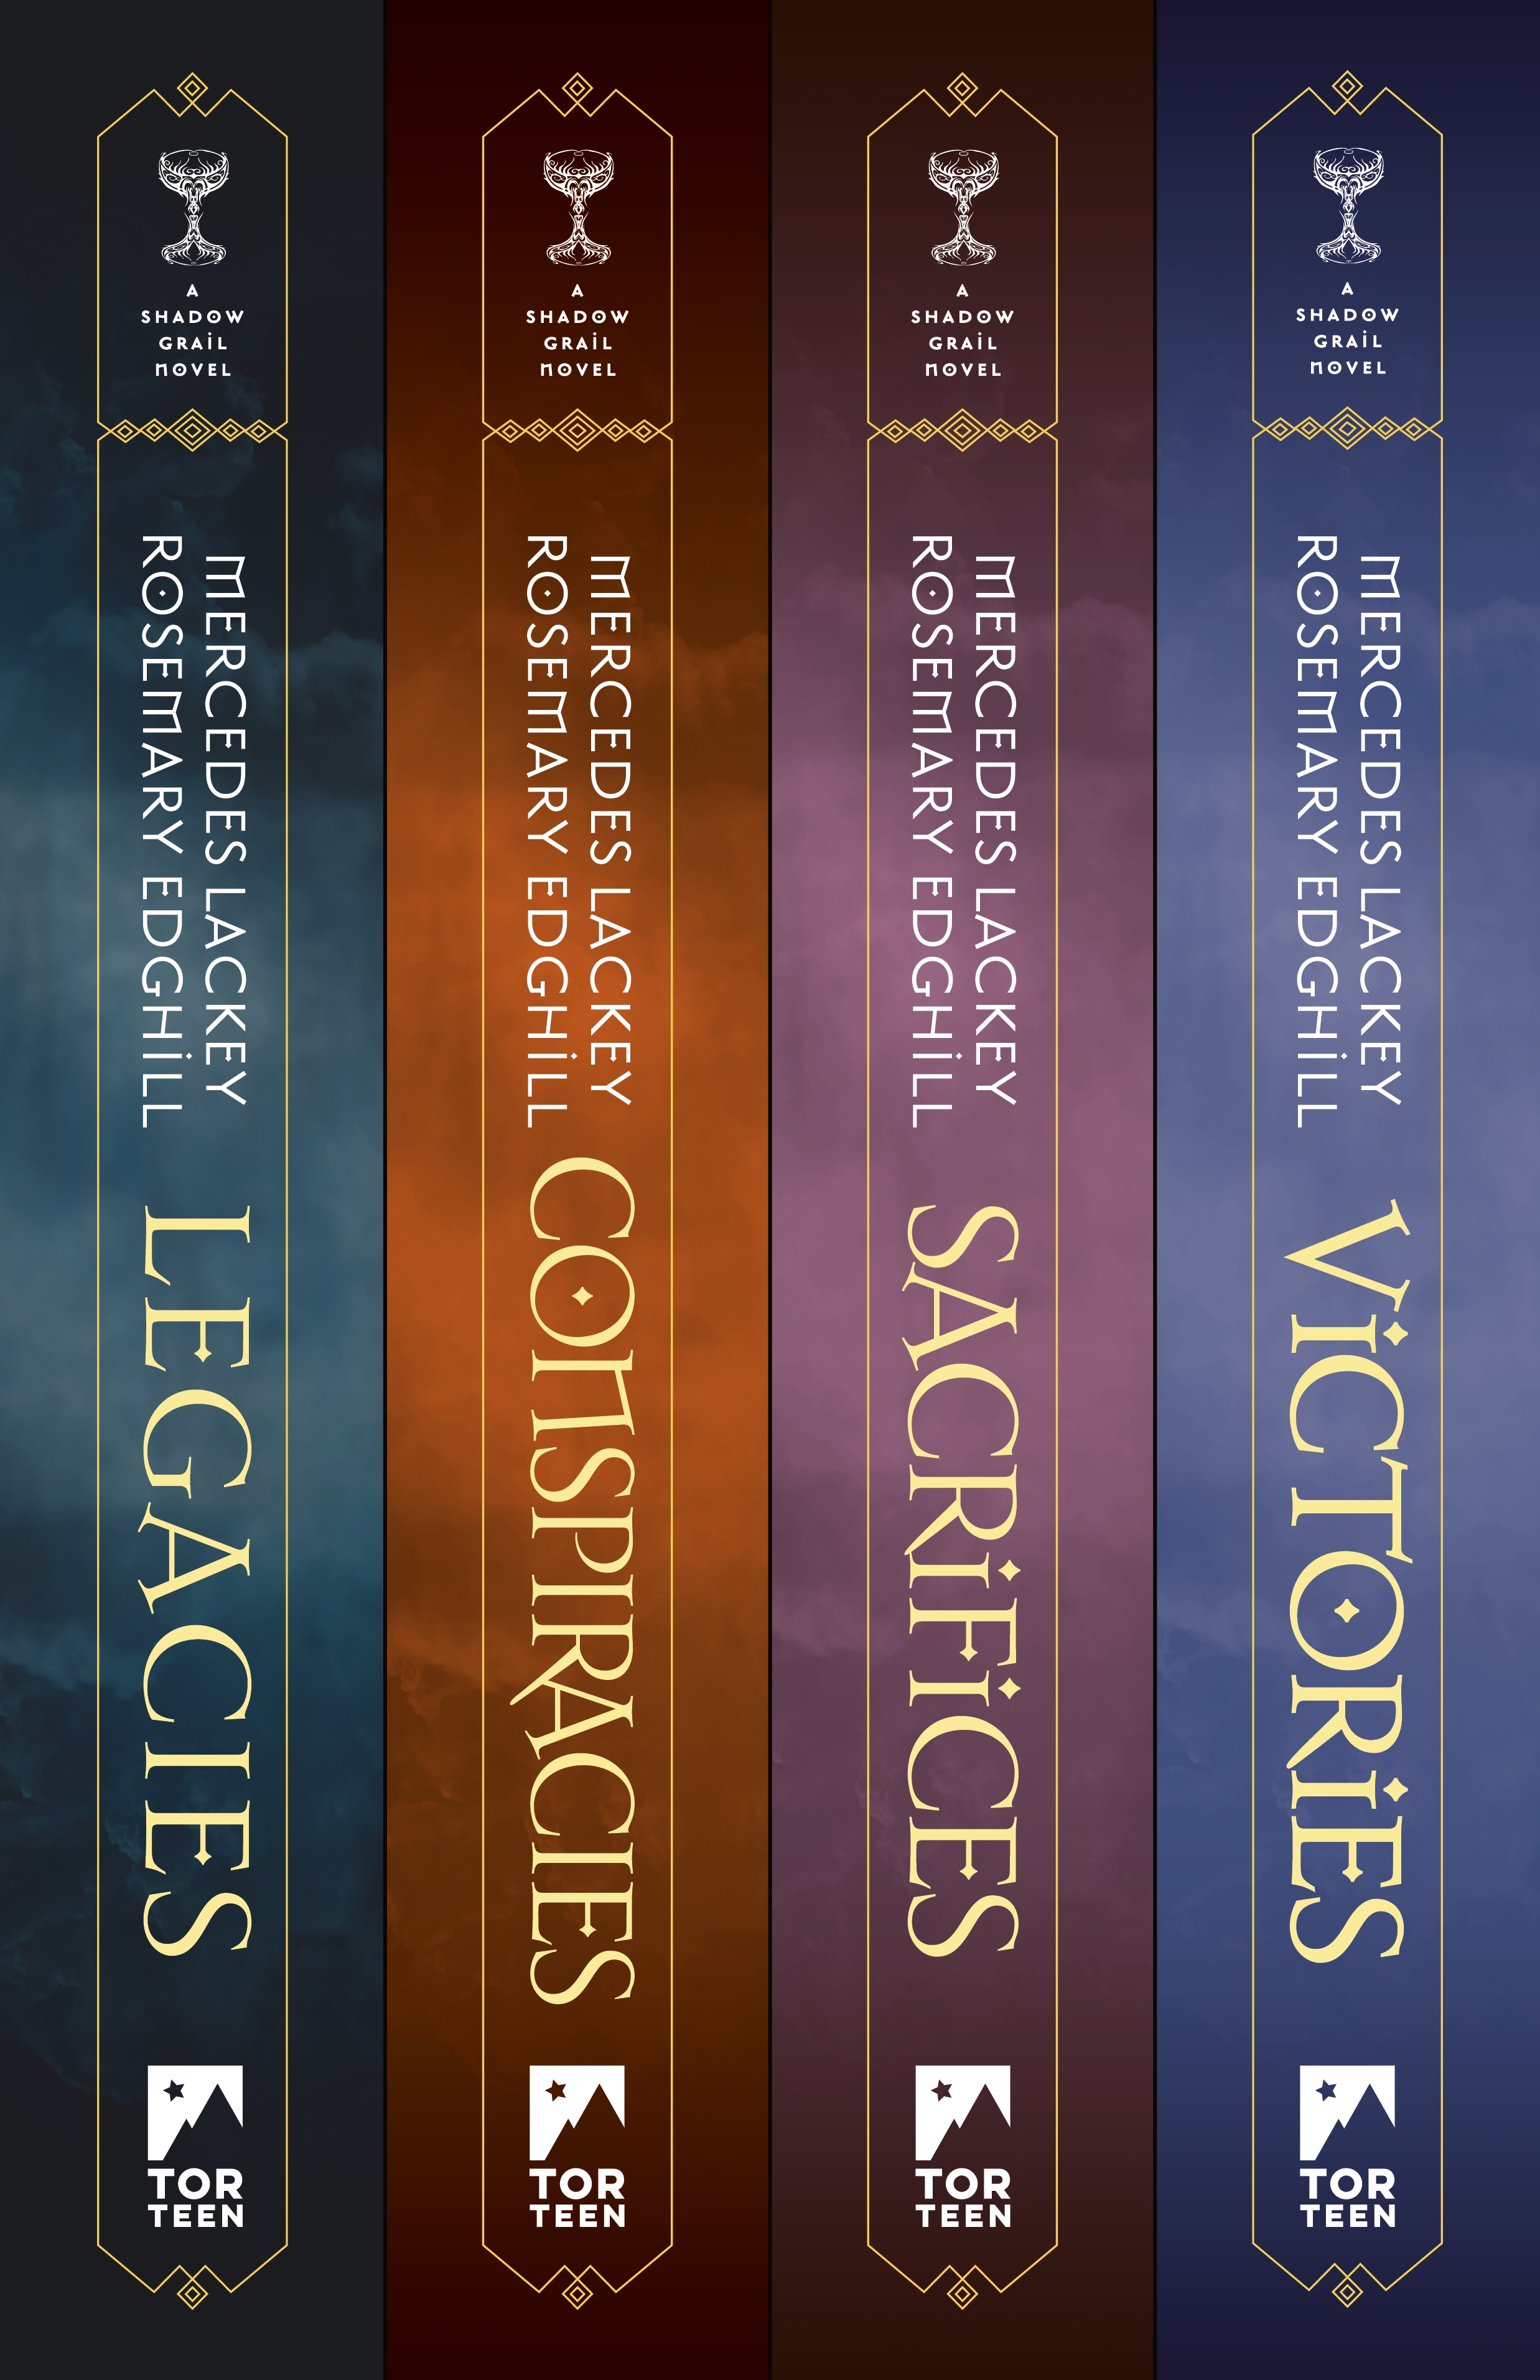 The Complete Shadow Grail Series : Legacies, Conspiracies, Sacrifices, Victories by Mercedes Lackey, Rosemary Edghill